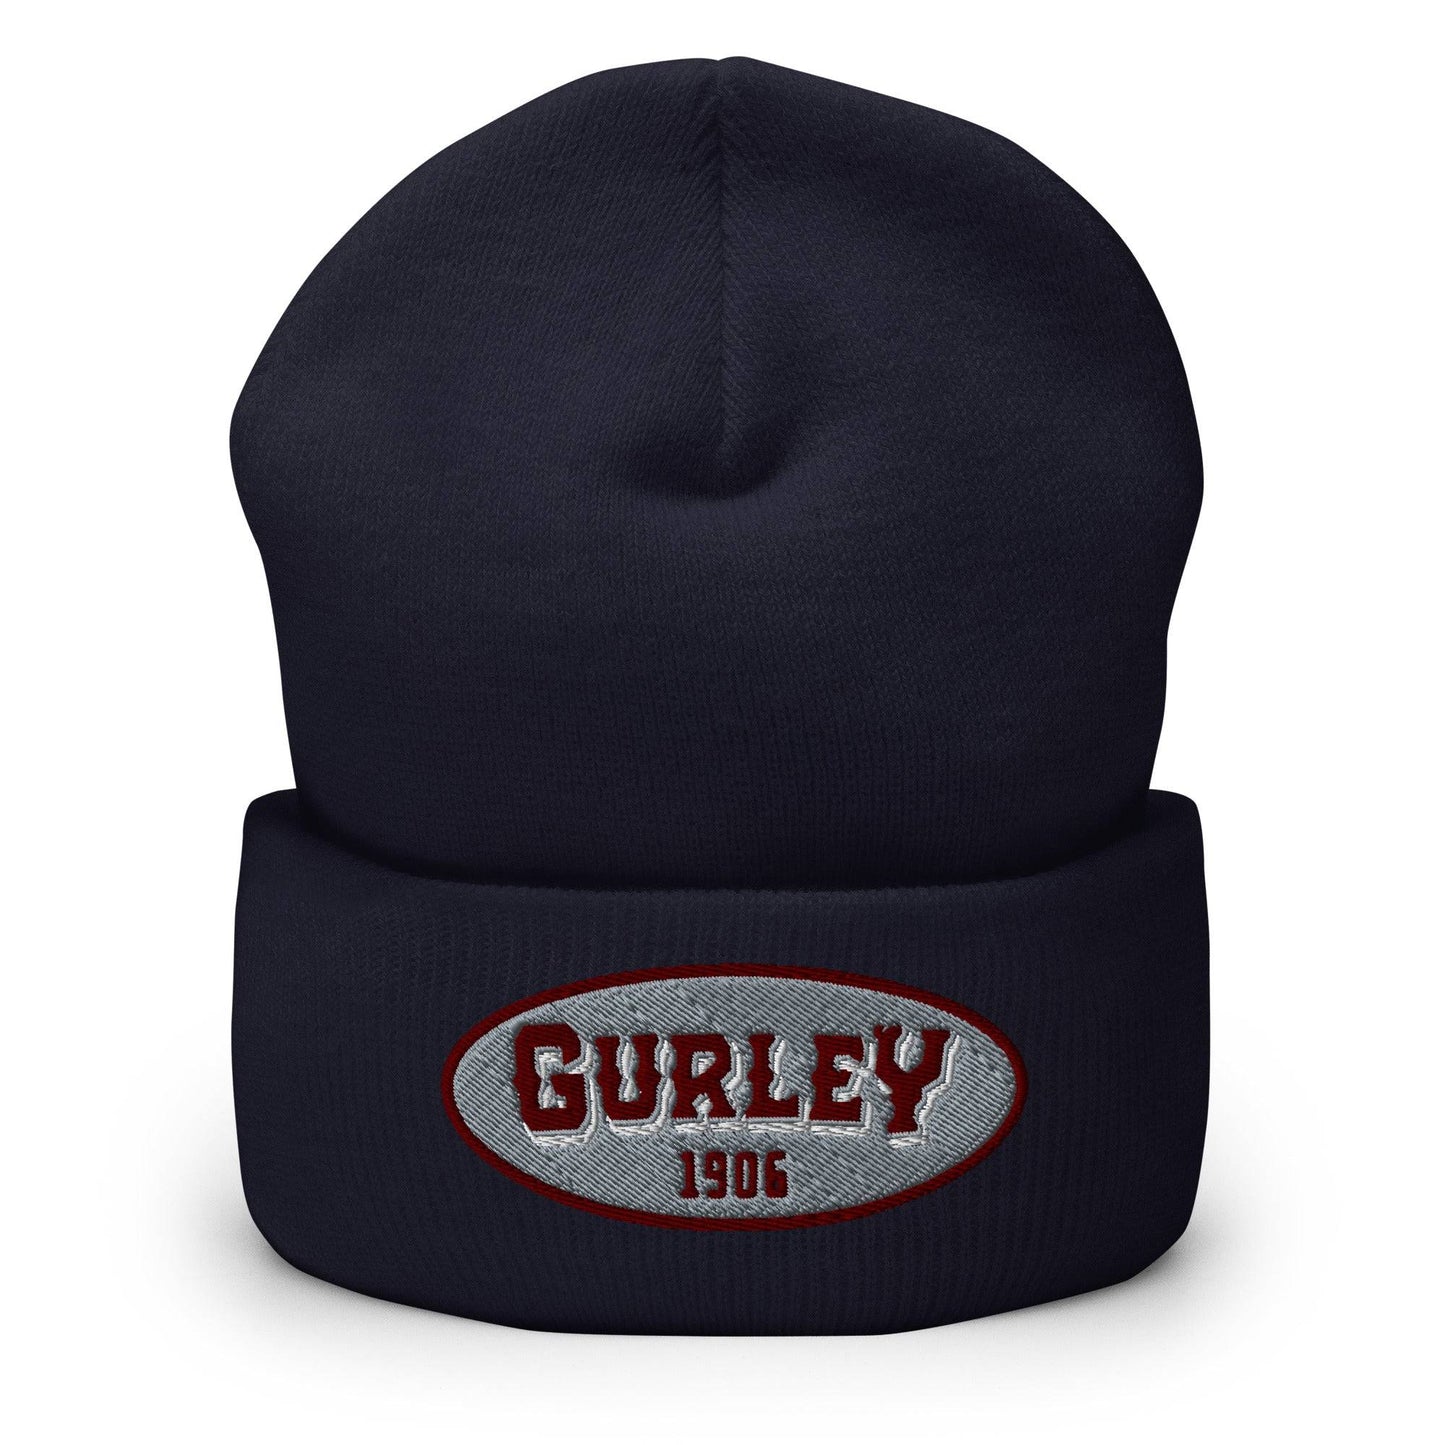 Gurley 1906 Embroidered Cuffed Beanie